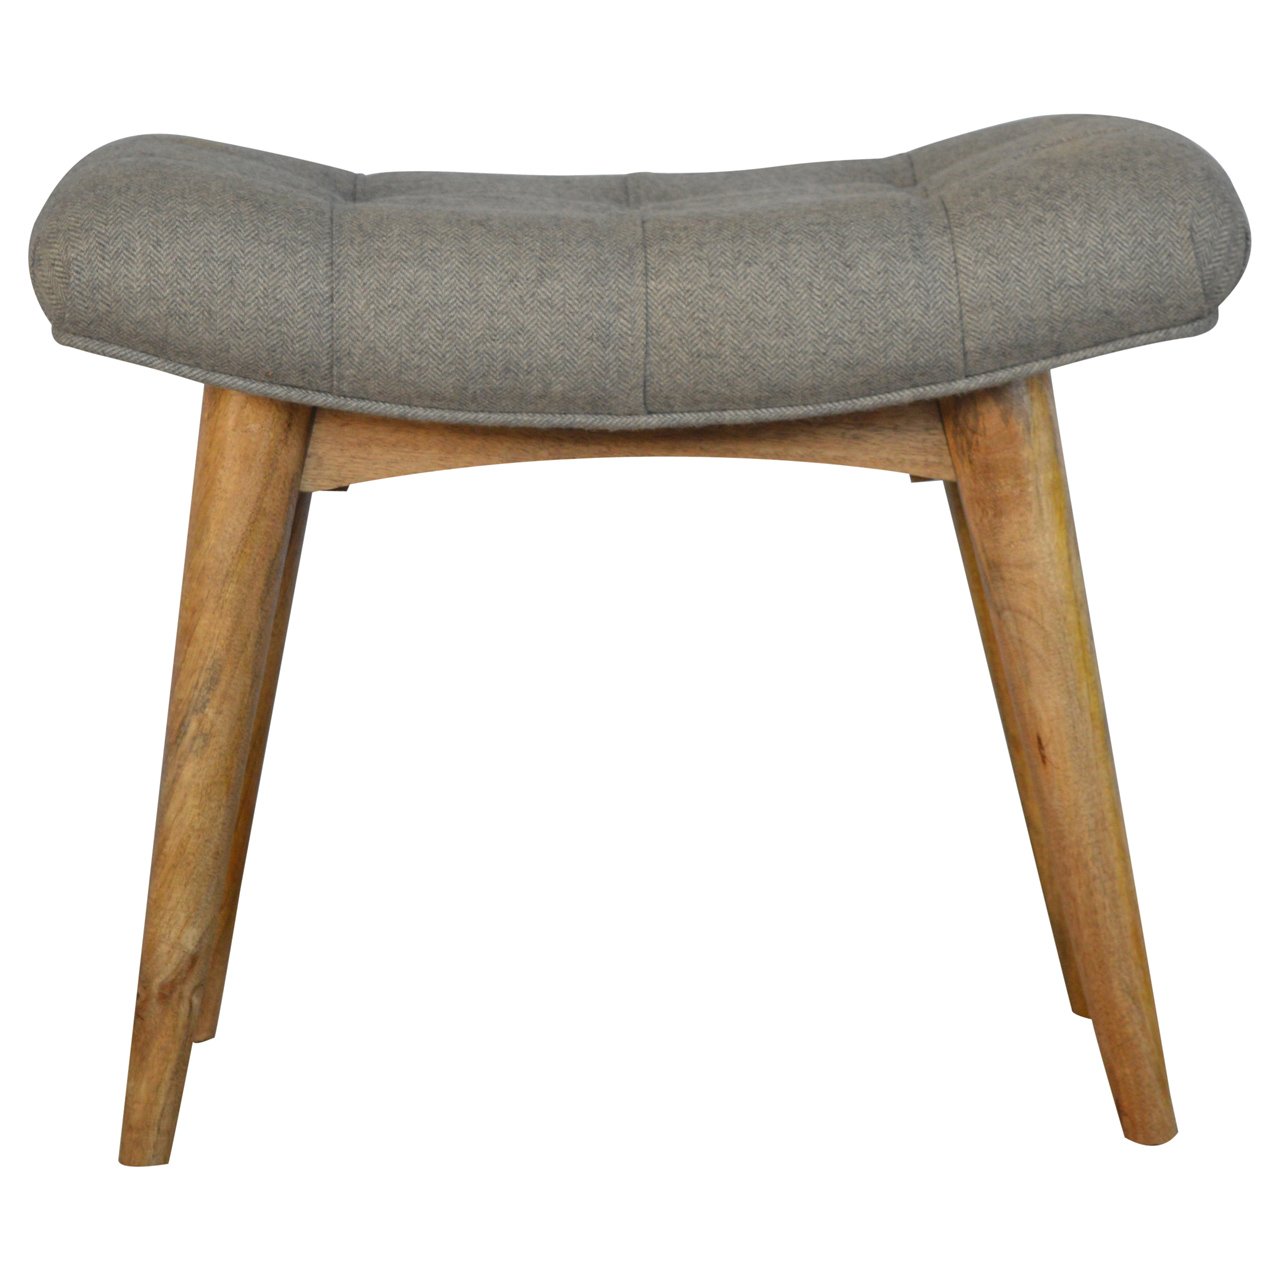 View Curved Grey Tweed Bench information